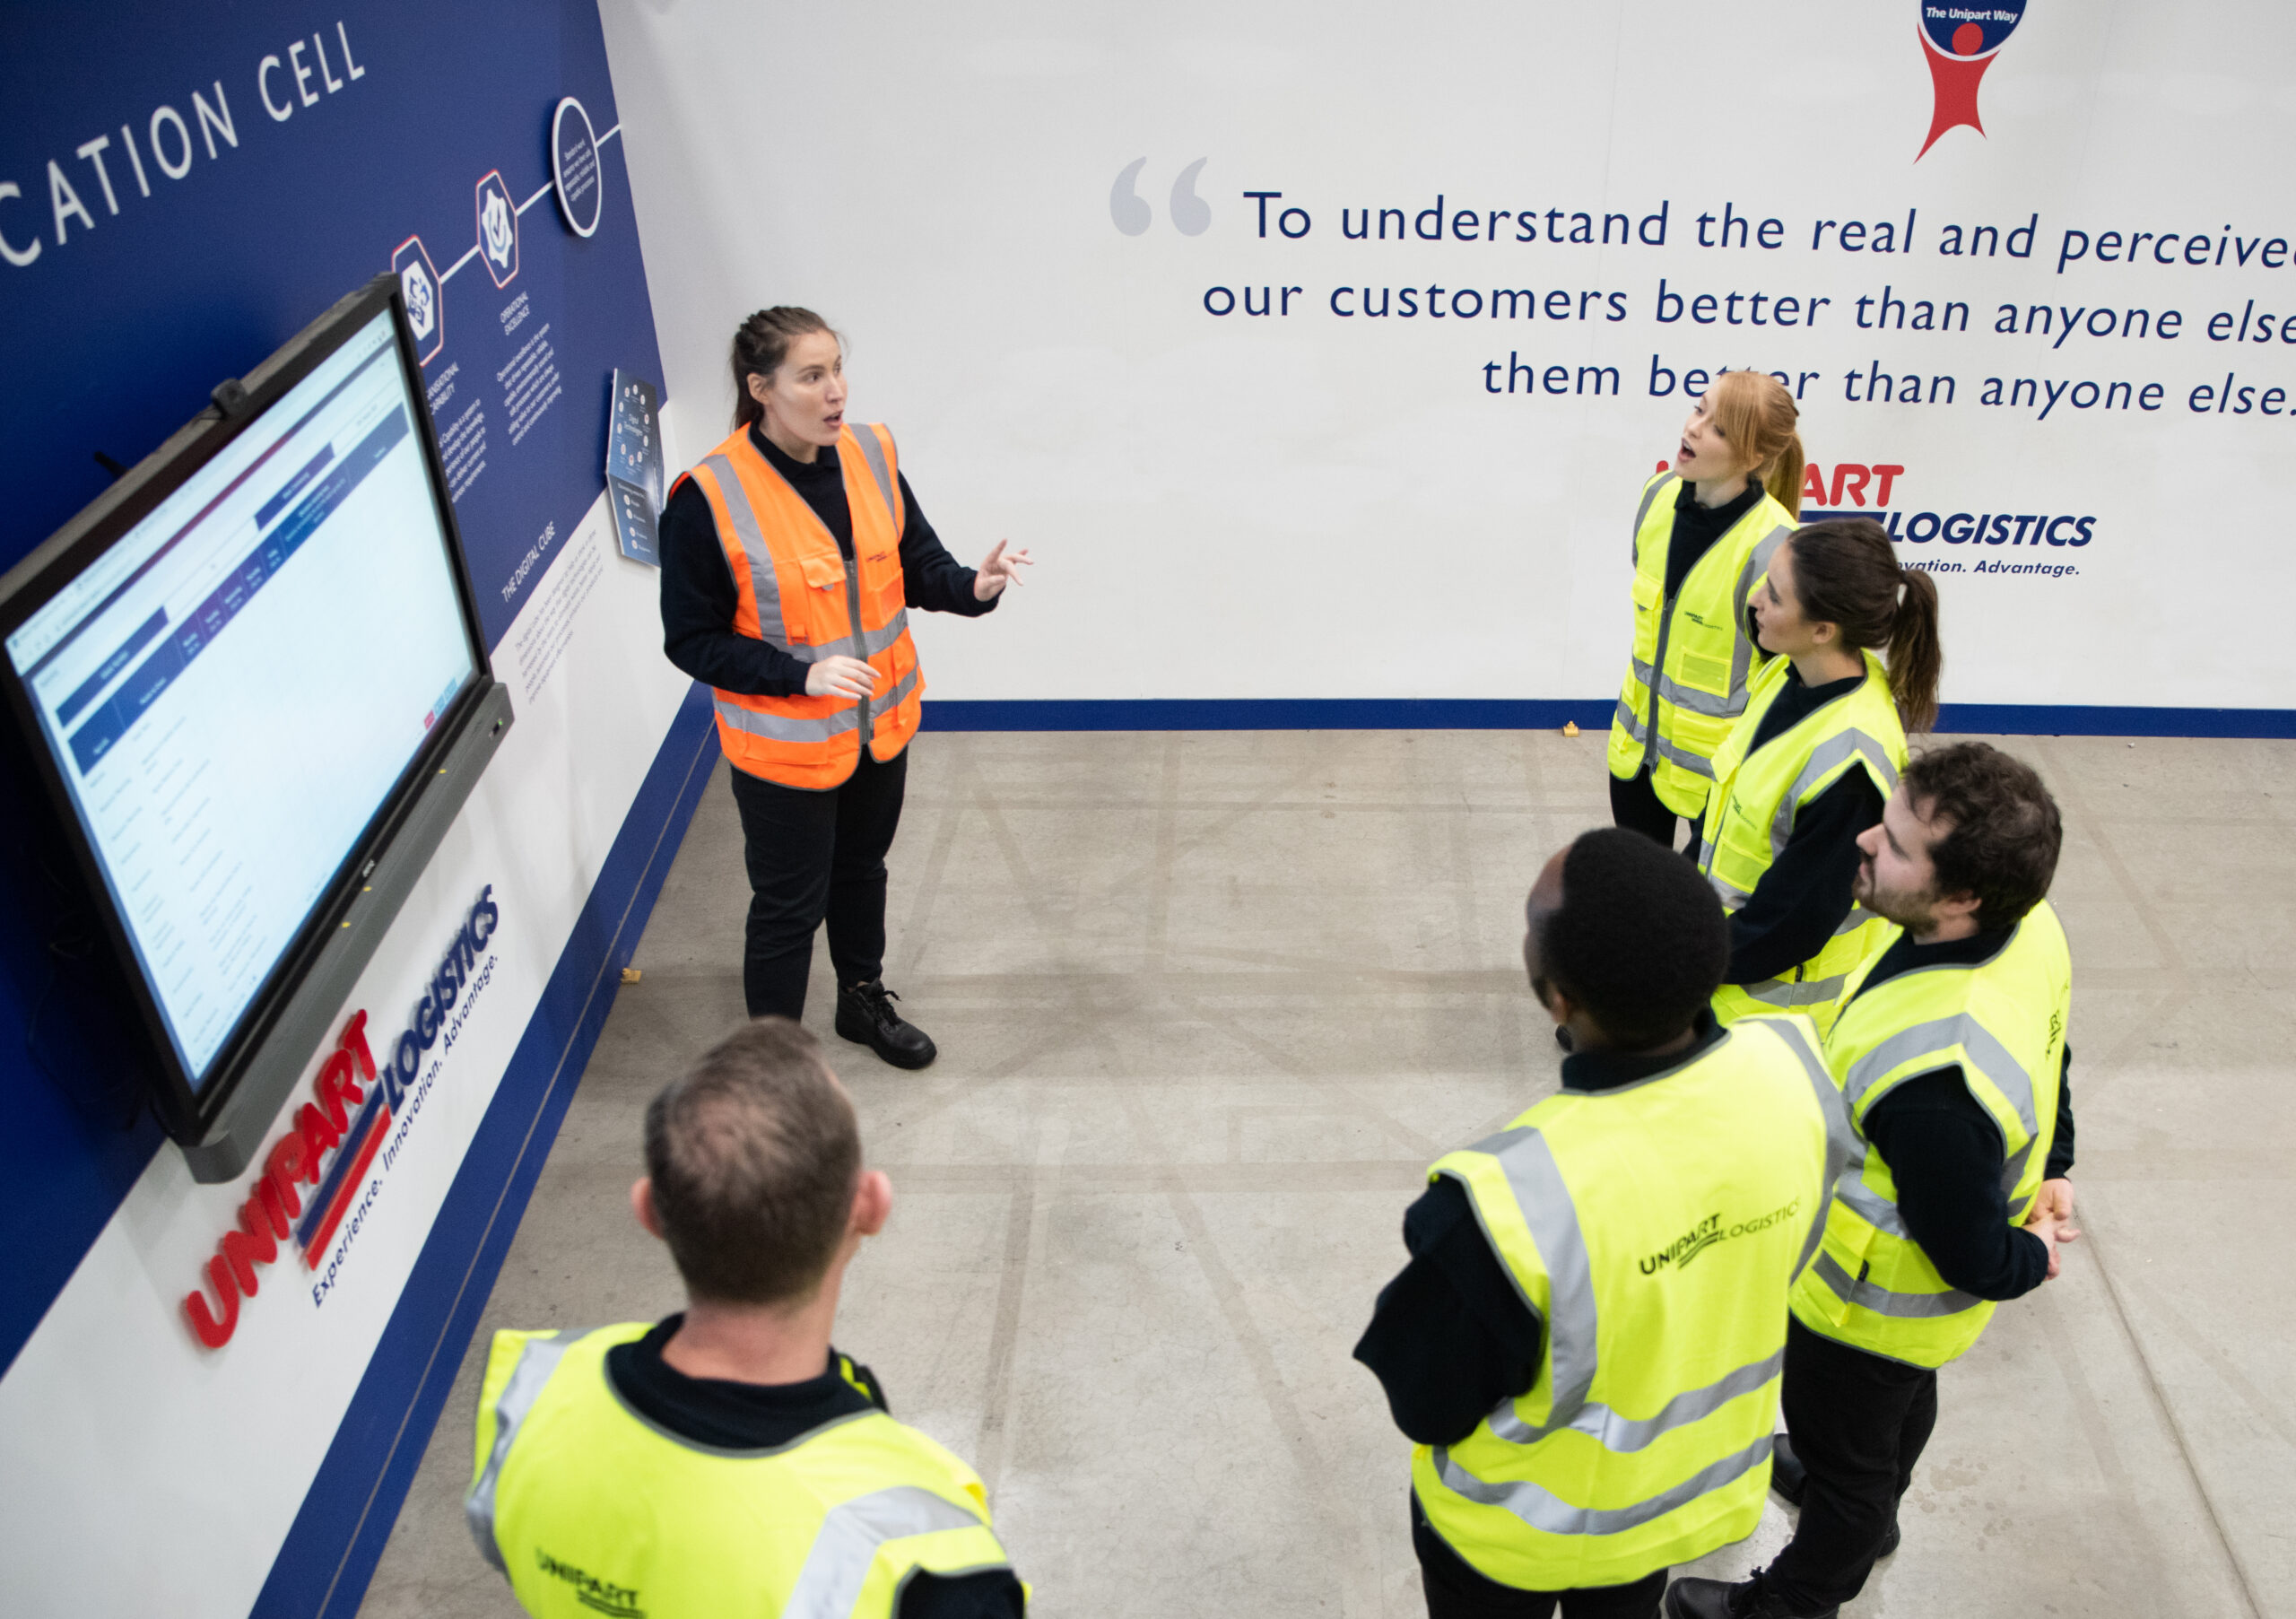 Digital Communications Cell are at the heart of Unipart's unique employee engagement culture